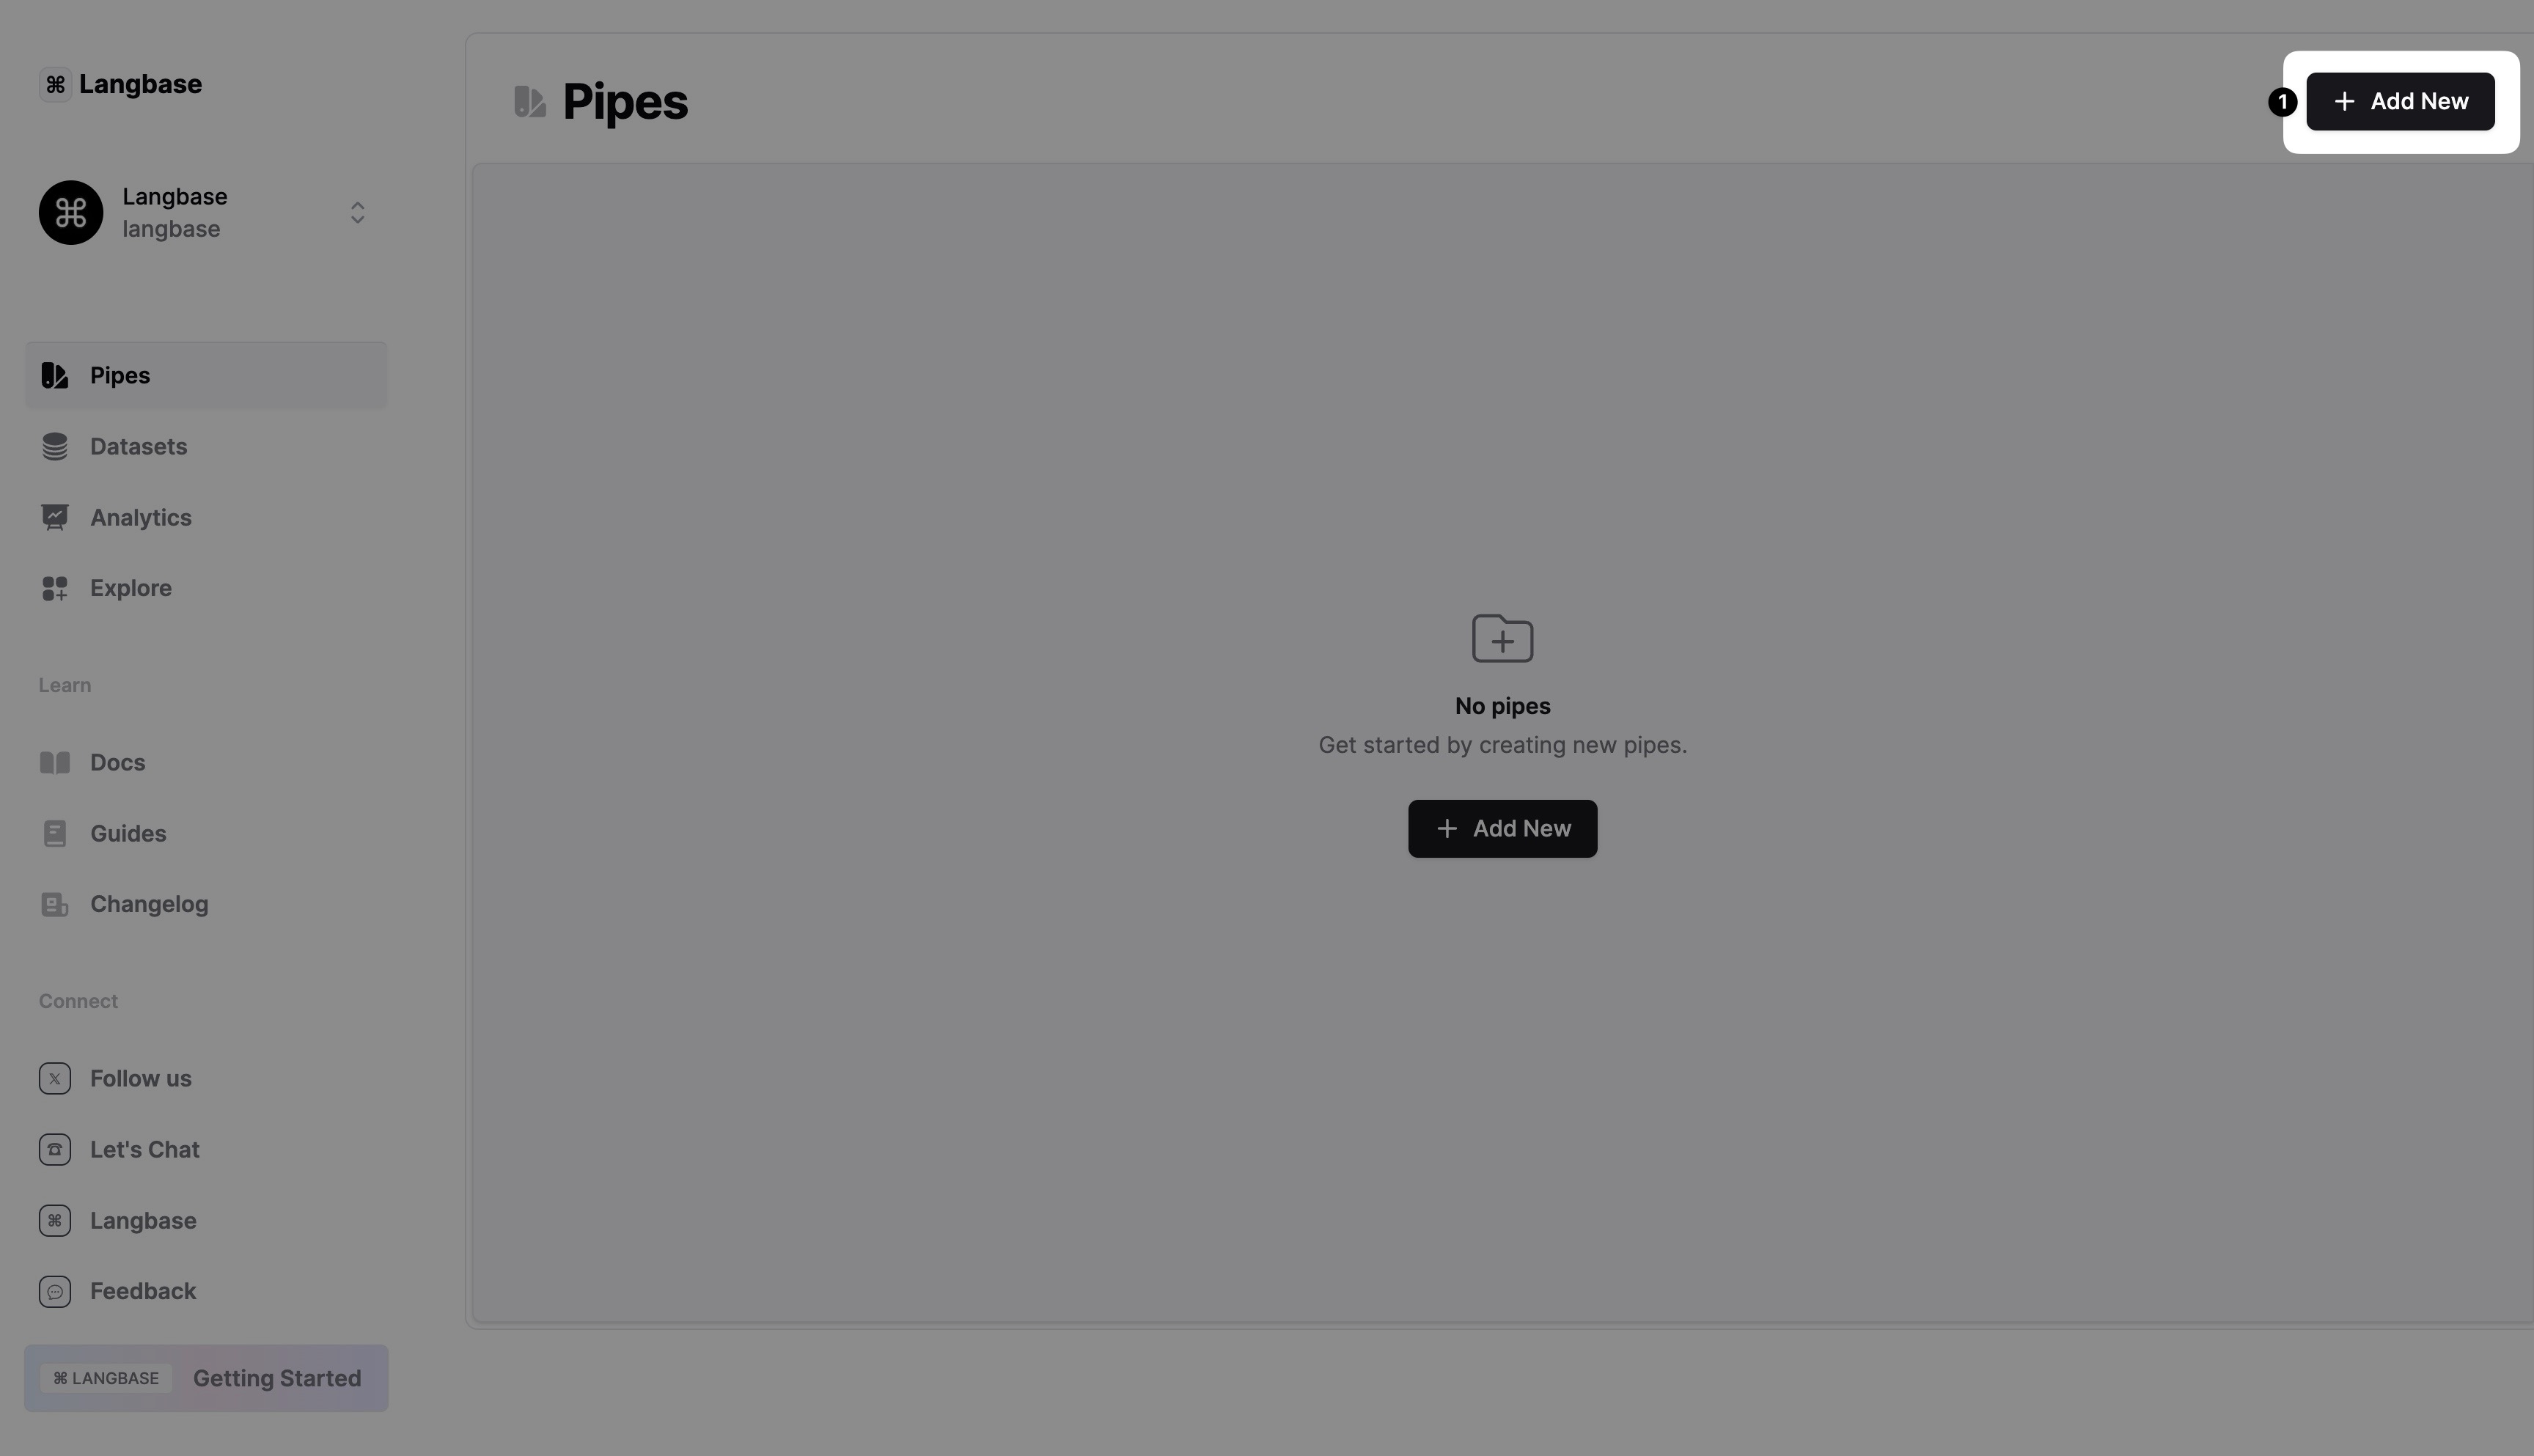 Add New button on Pipes page